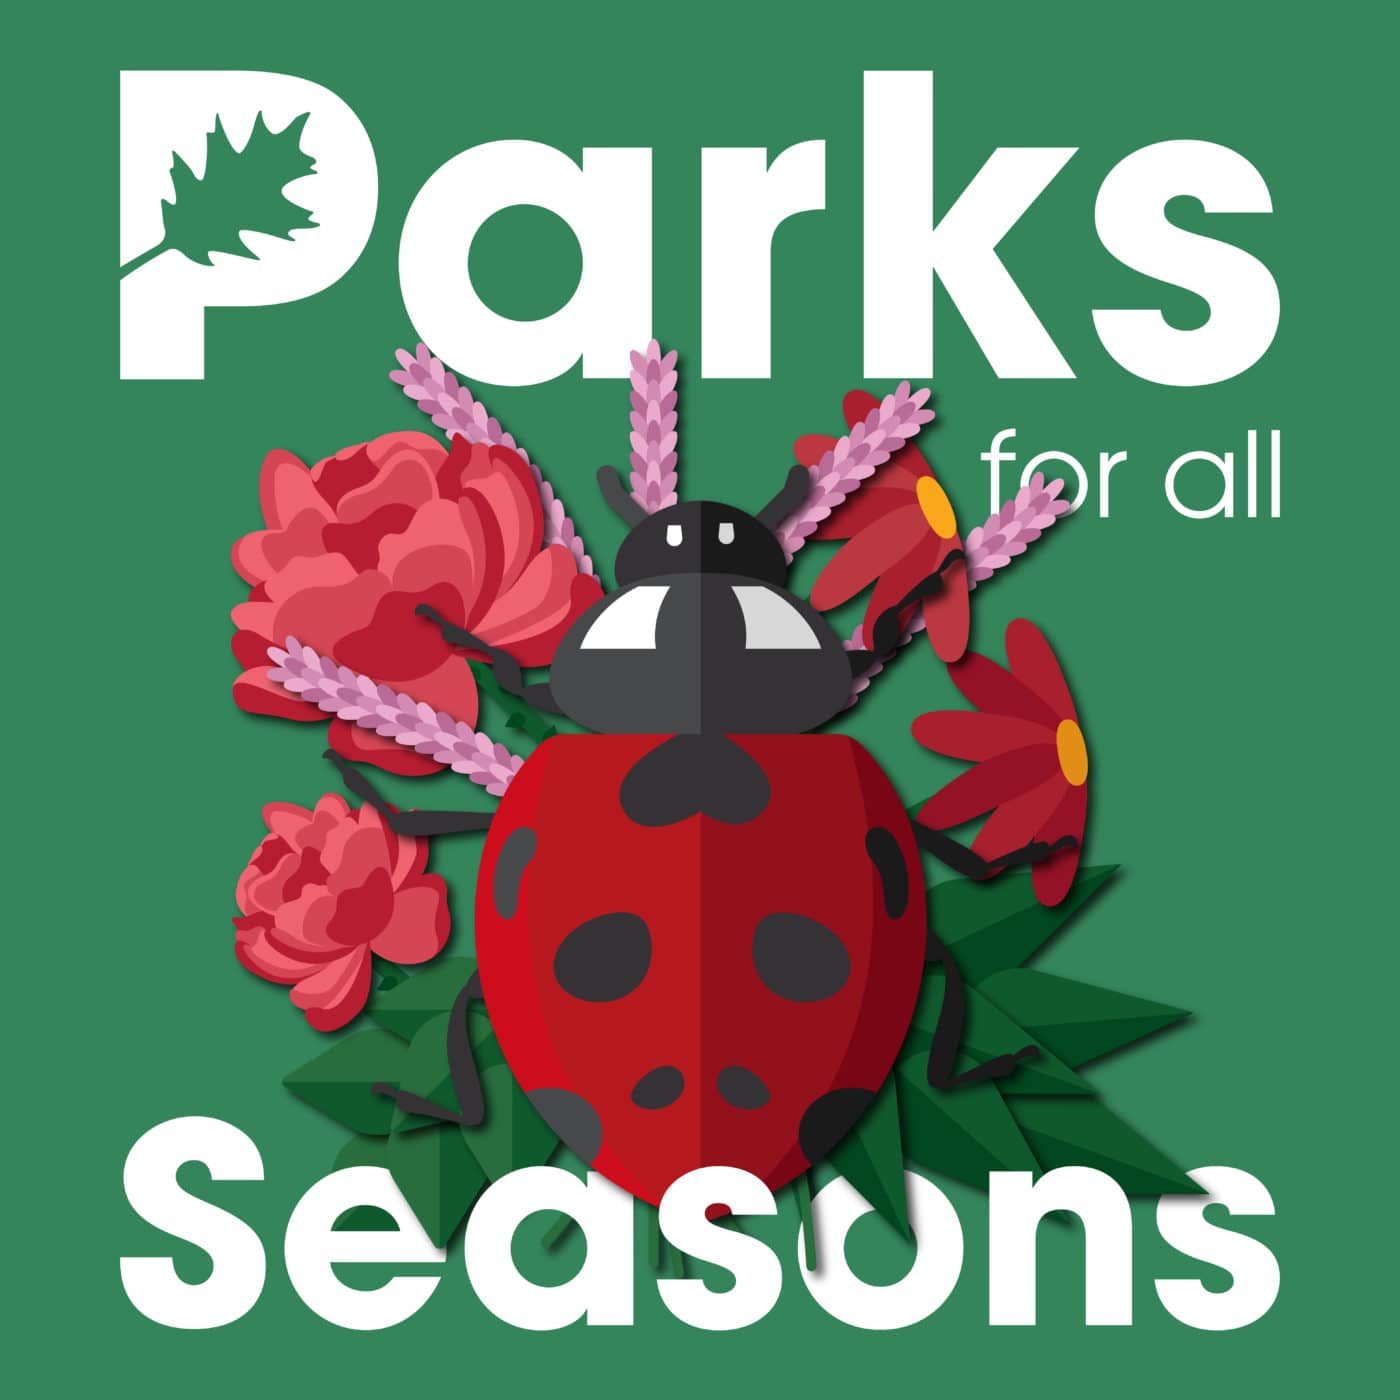 Lady Bug Parks for All Seasons